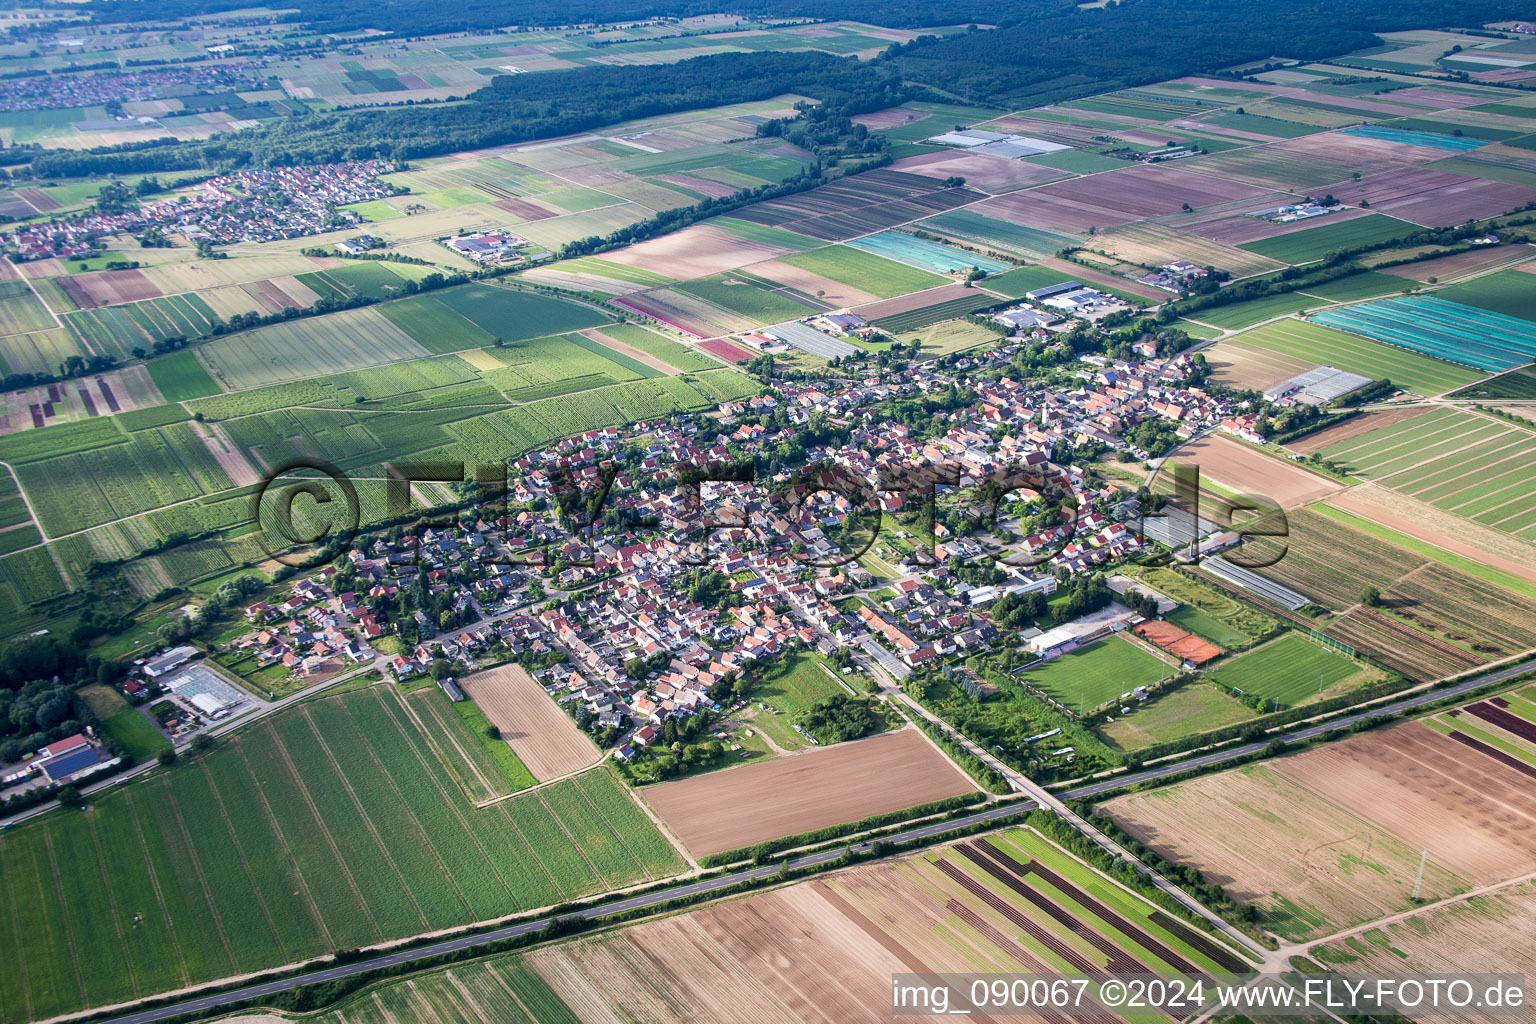 Aerial view of Village - view on the edge of agricultural fields and farmland in Weingarten (Pfalz) in the state Rhineland-Palatinate, Germany